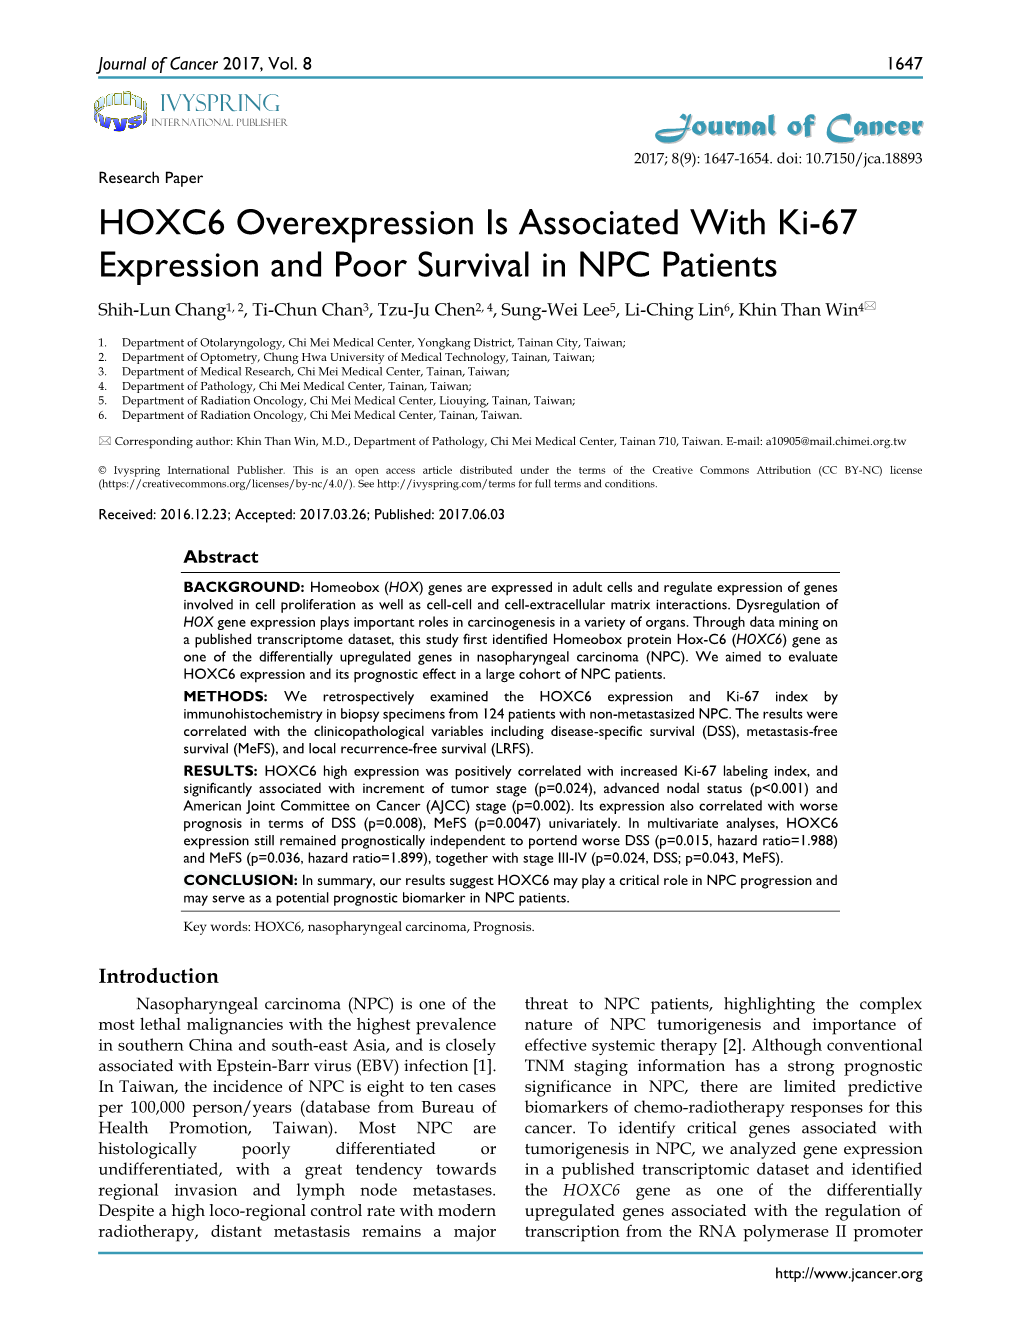 HOXC6 Overexpression Is Associated with Ki-67 Expression and Poor